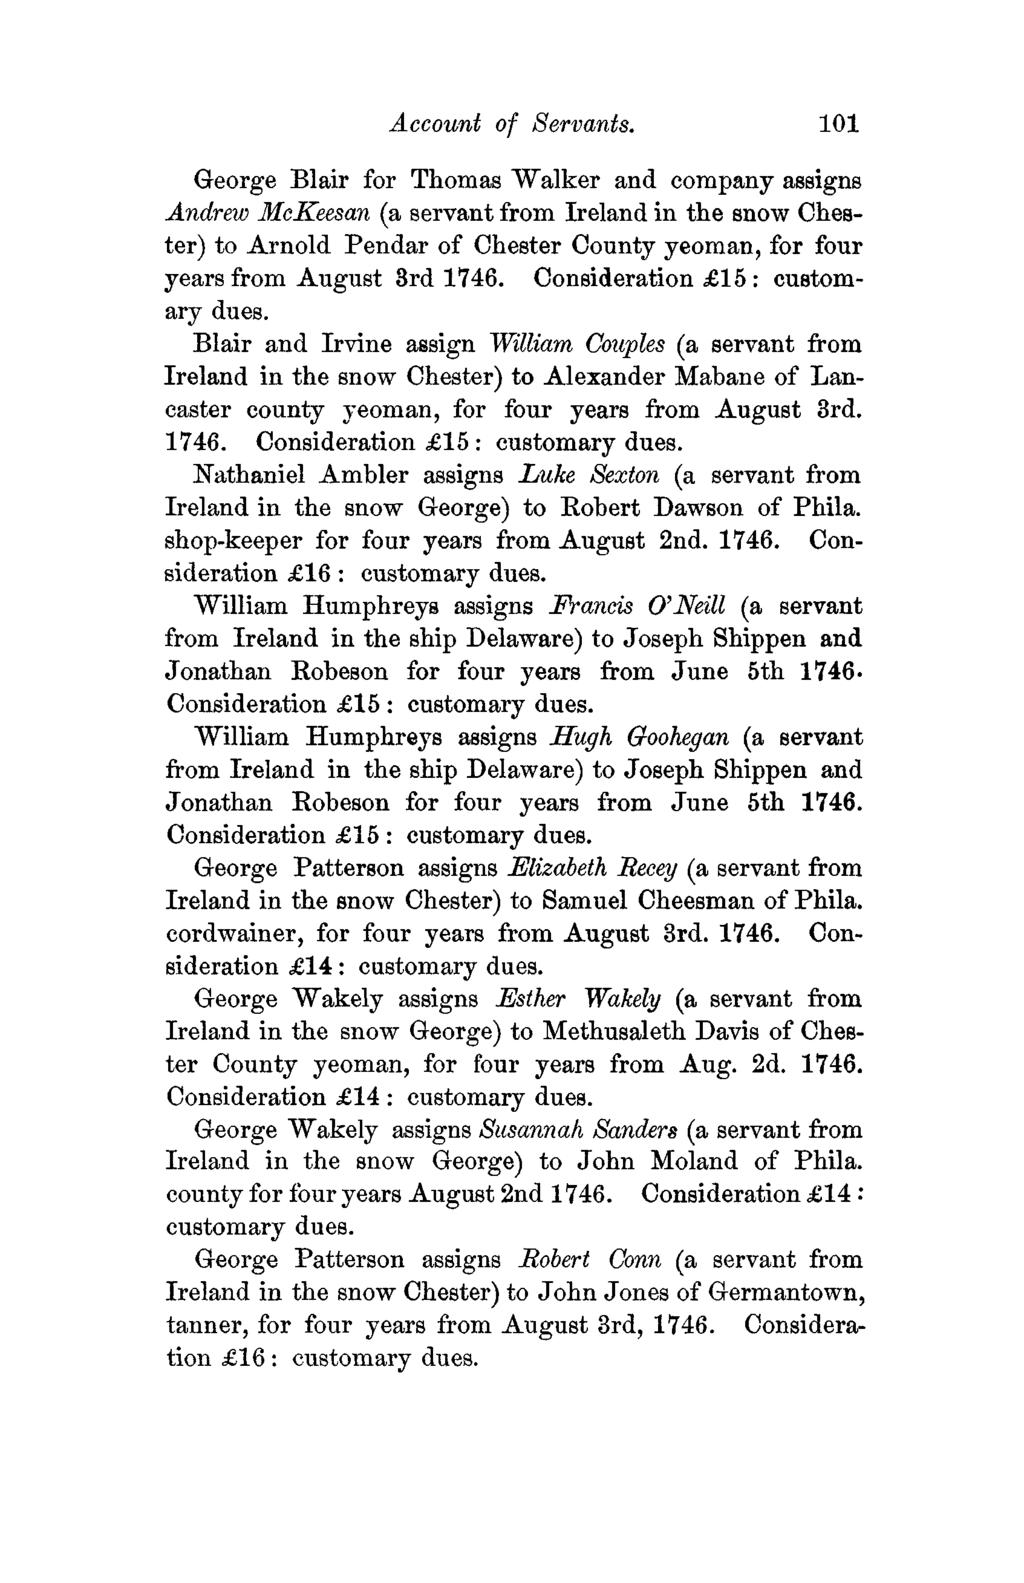 Account of Servants. 101 George Blair for Thomas Walker and company assigns Andrew McKeesan (a servant from Ireland in the snow Chester) to Arnold Pendar of Chester County yeoman?